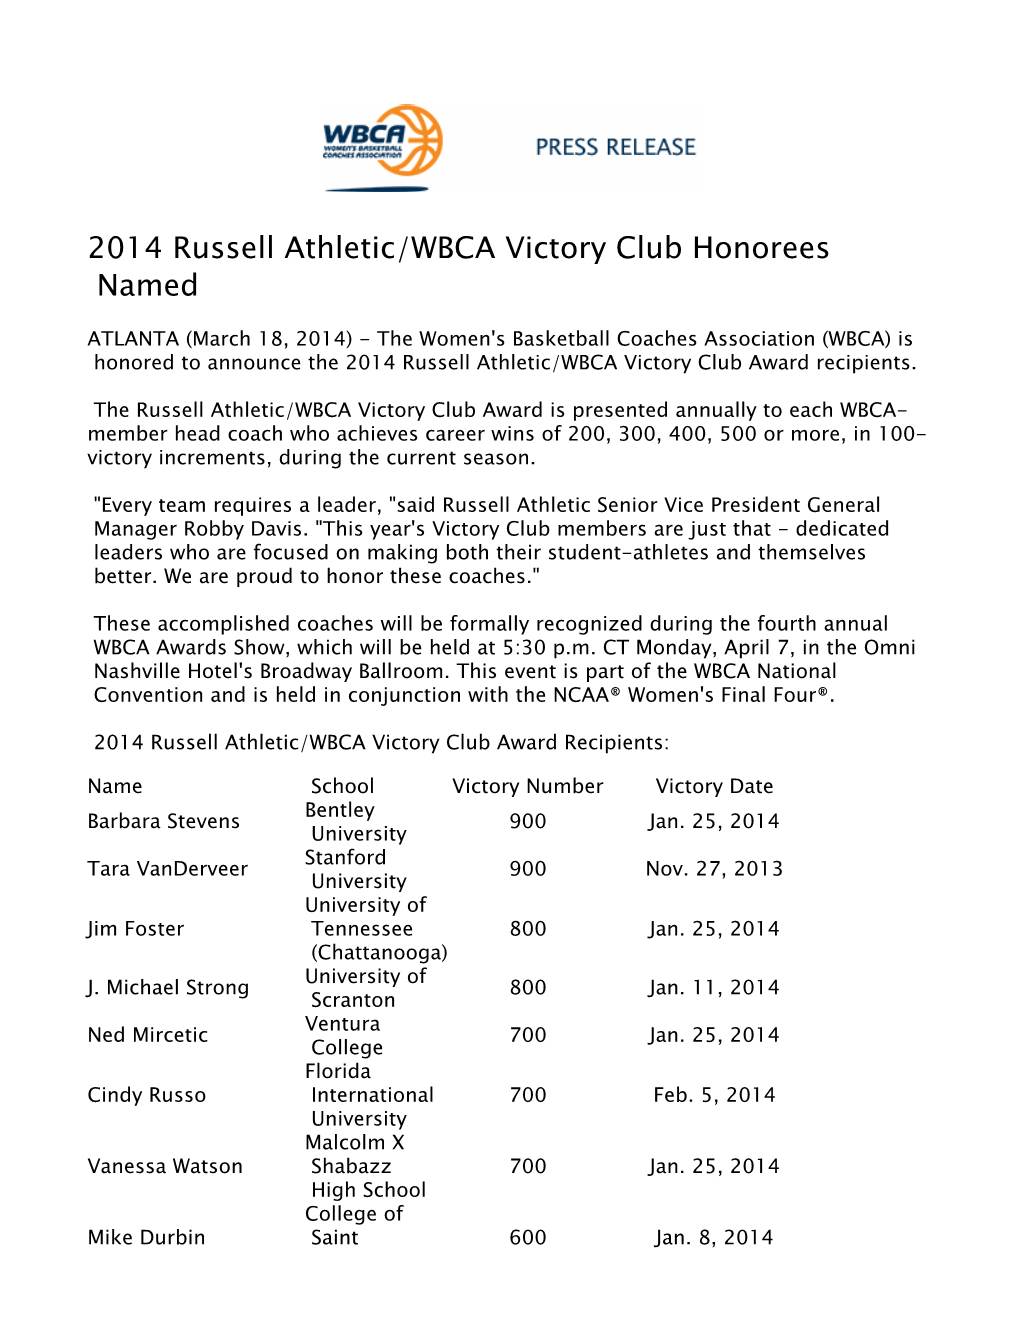 2014 Russell Athletic/WBCA Victory Club Honorees Named 2013-14